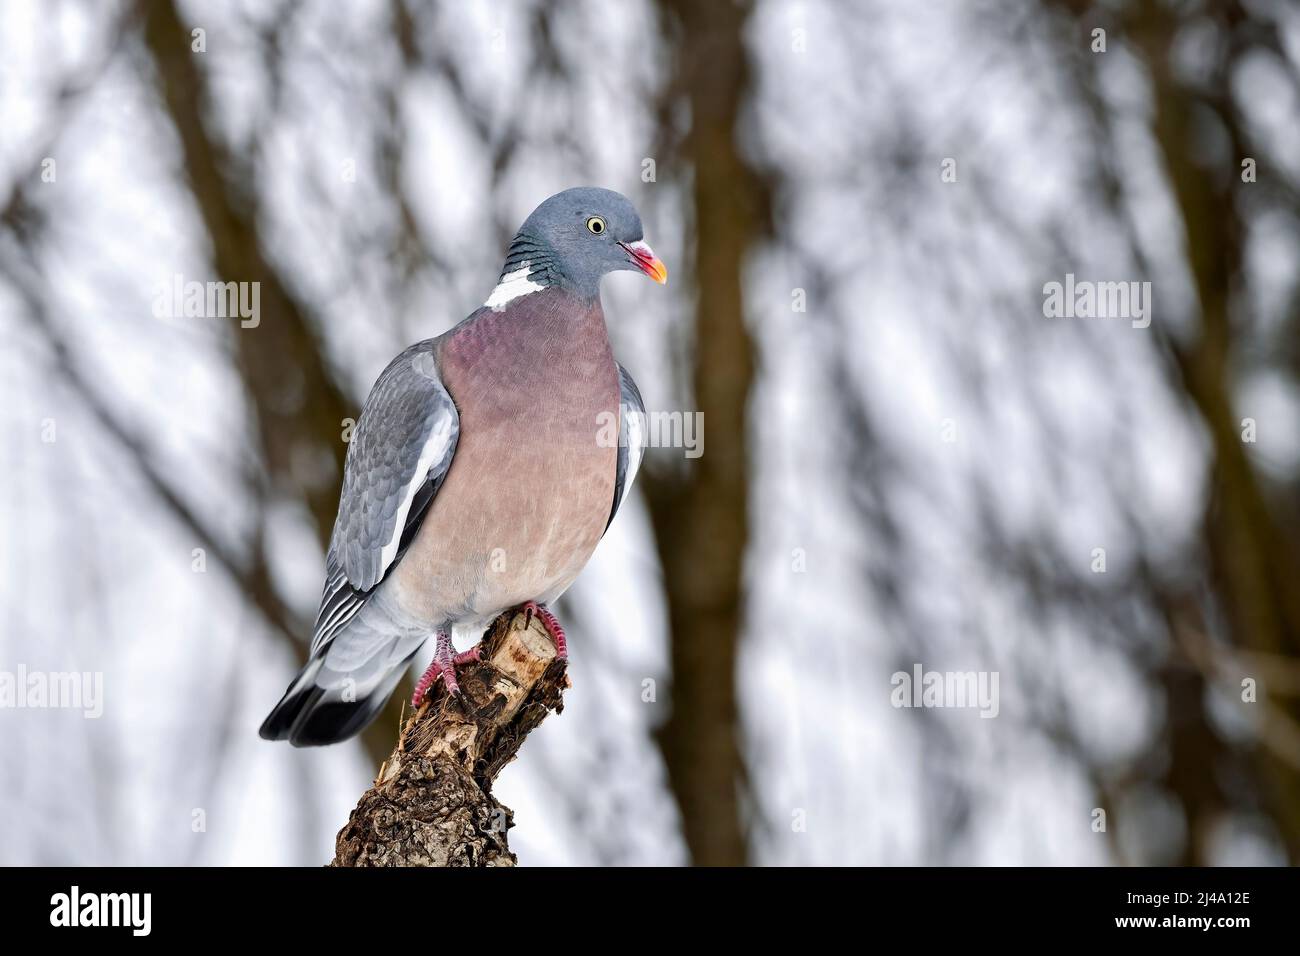 Wood pigeon in early spring Stock Photo